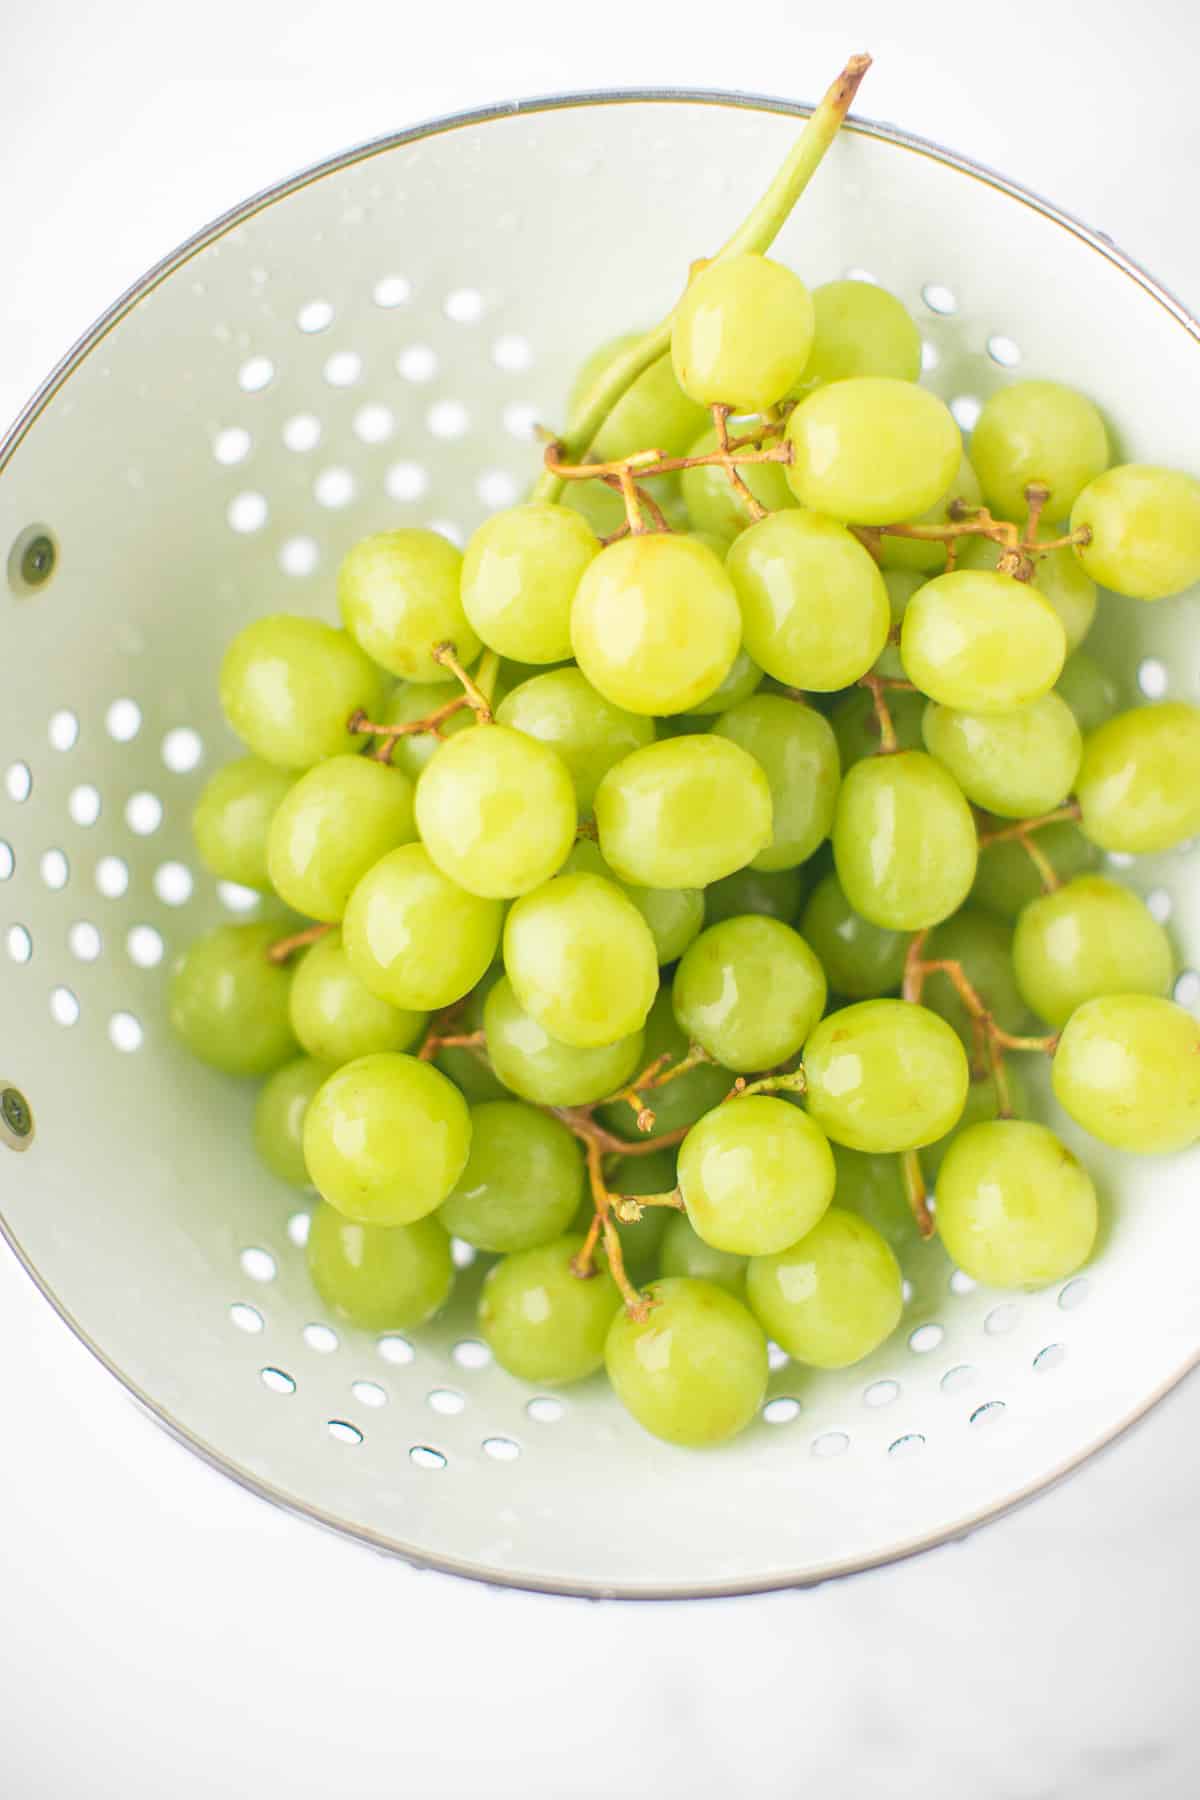 grapes being washed in a colander.